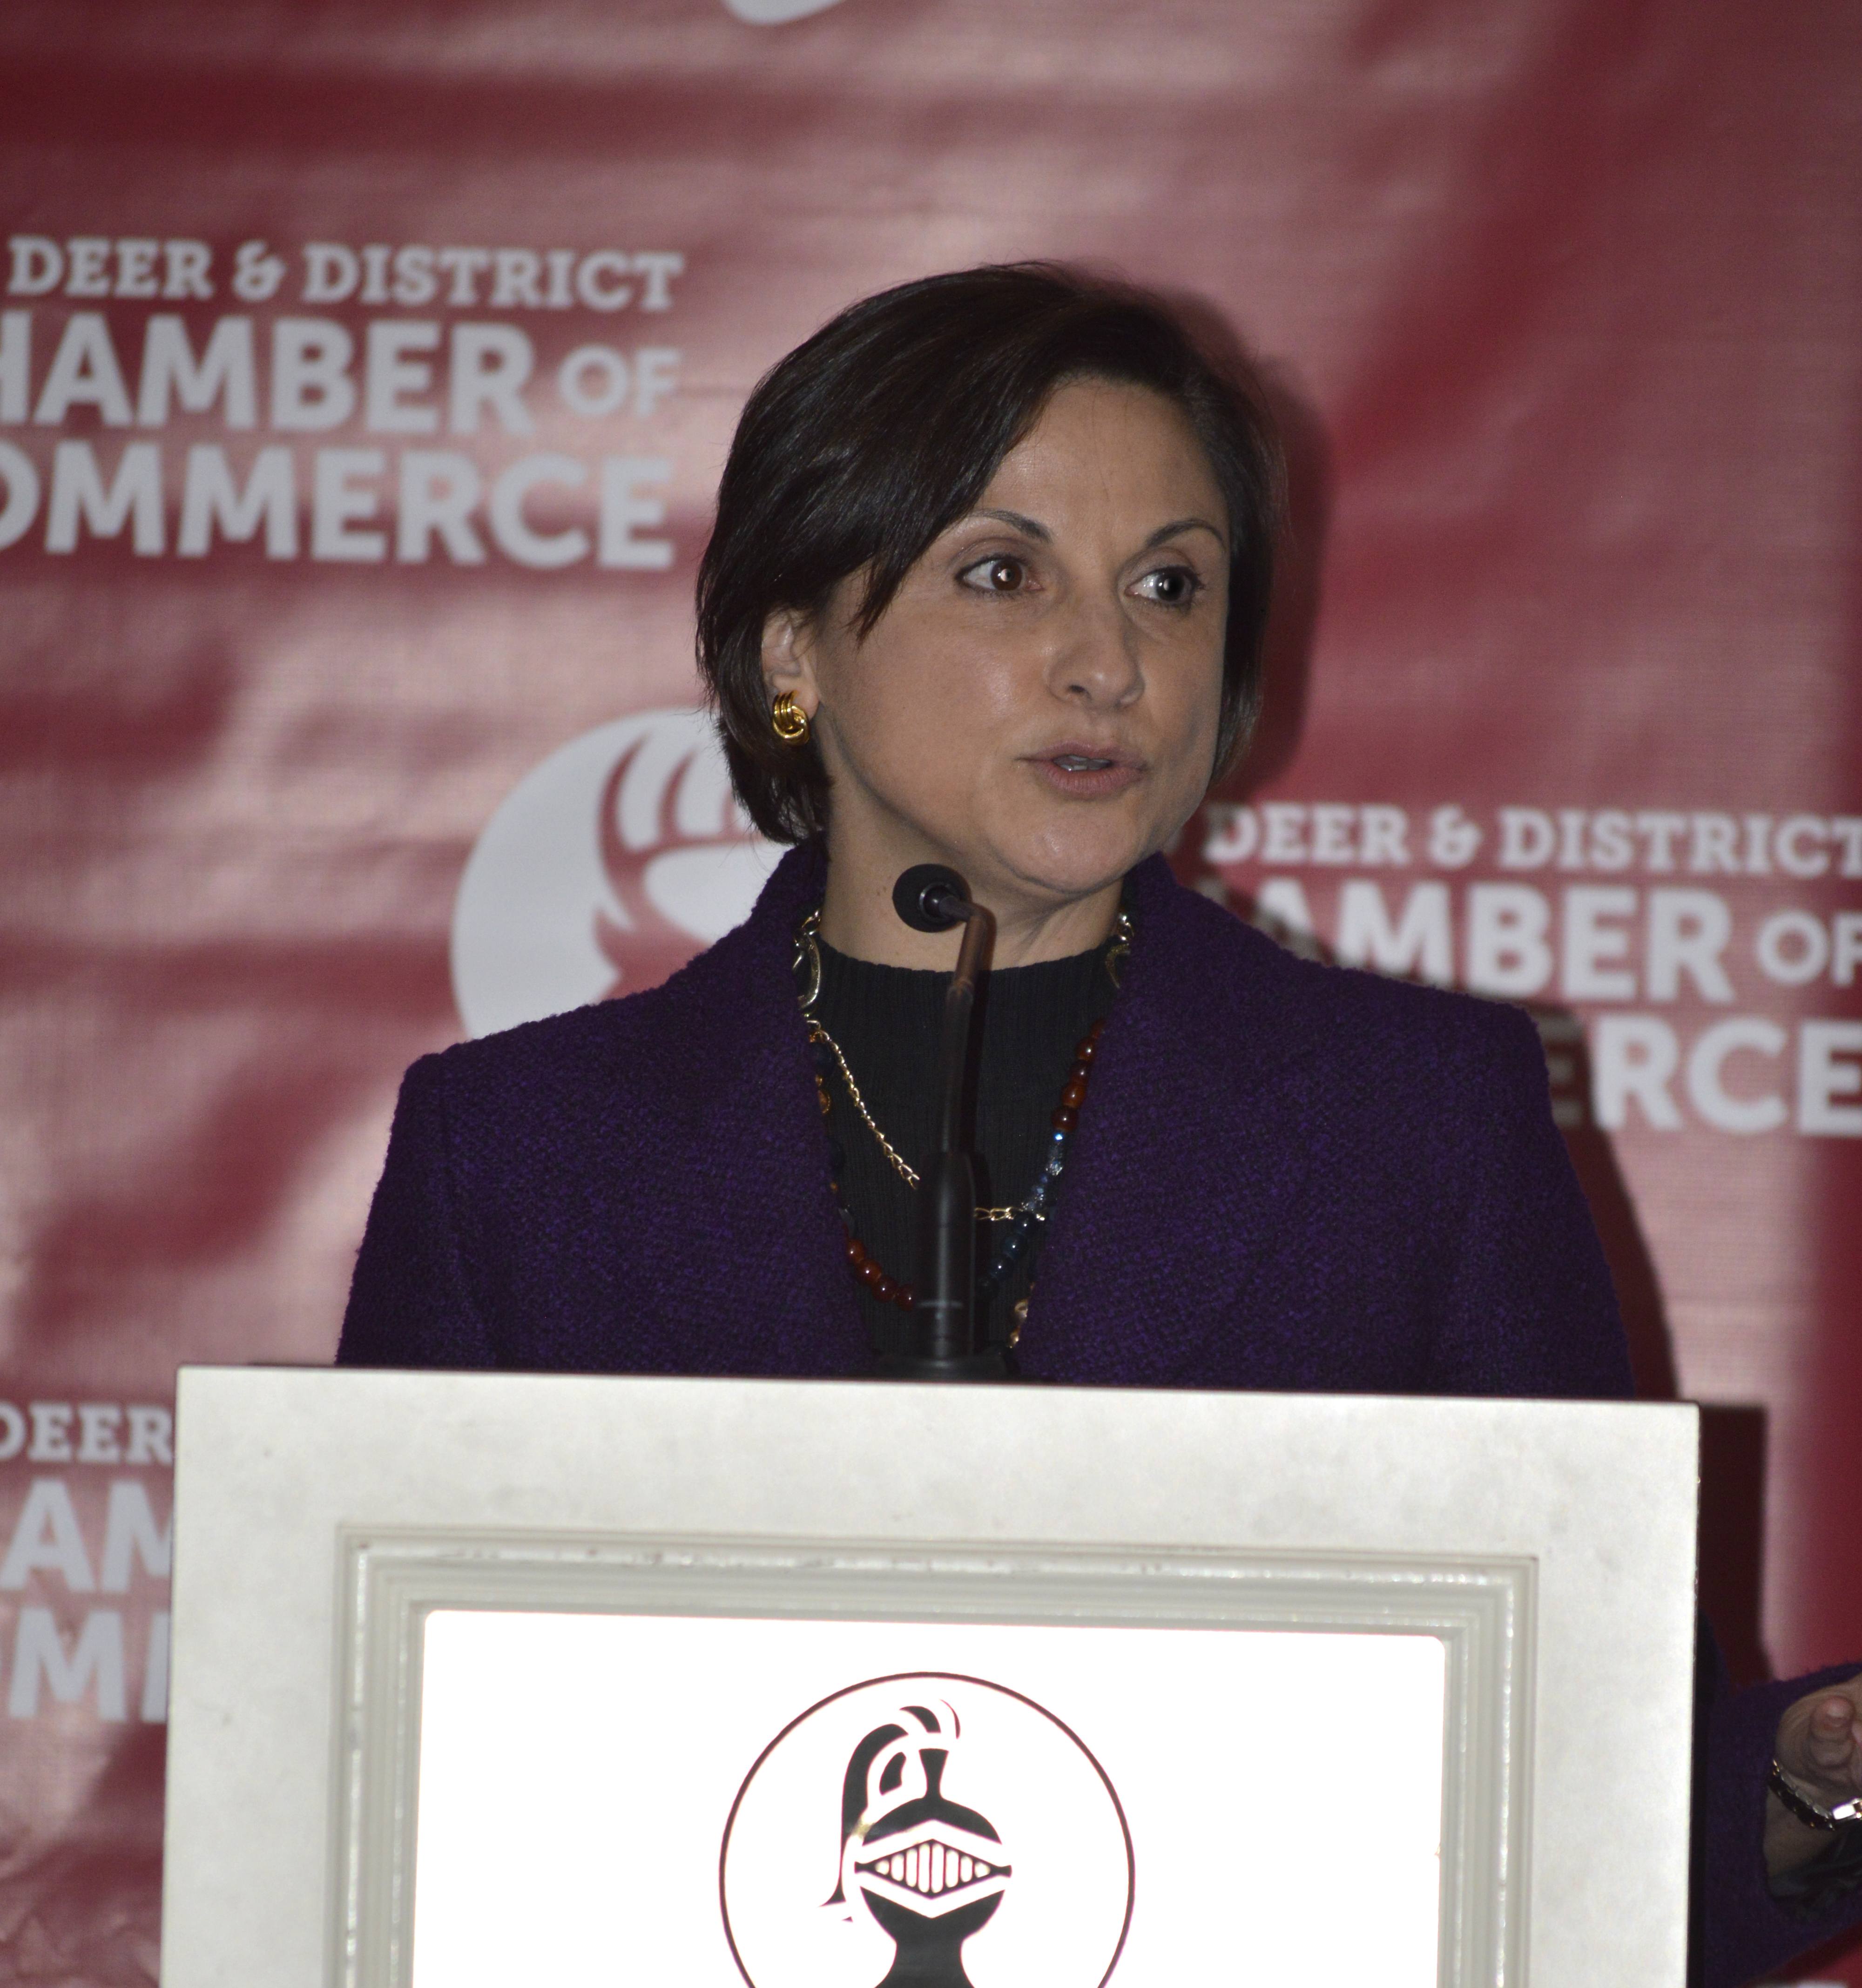 POWER - ENMAX President and CEO Gianna Manes speaks about changes in the electricity sector during the Red Deer and District Chamber of Commerce luncheon at the Black Knight Inn on Wednesday.